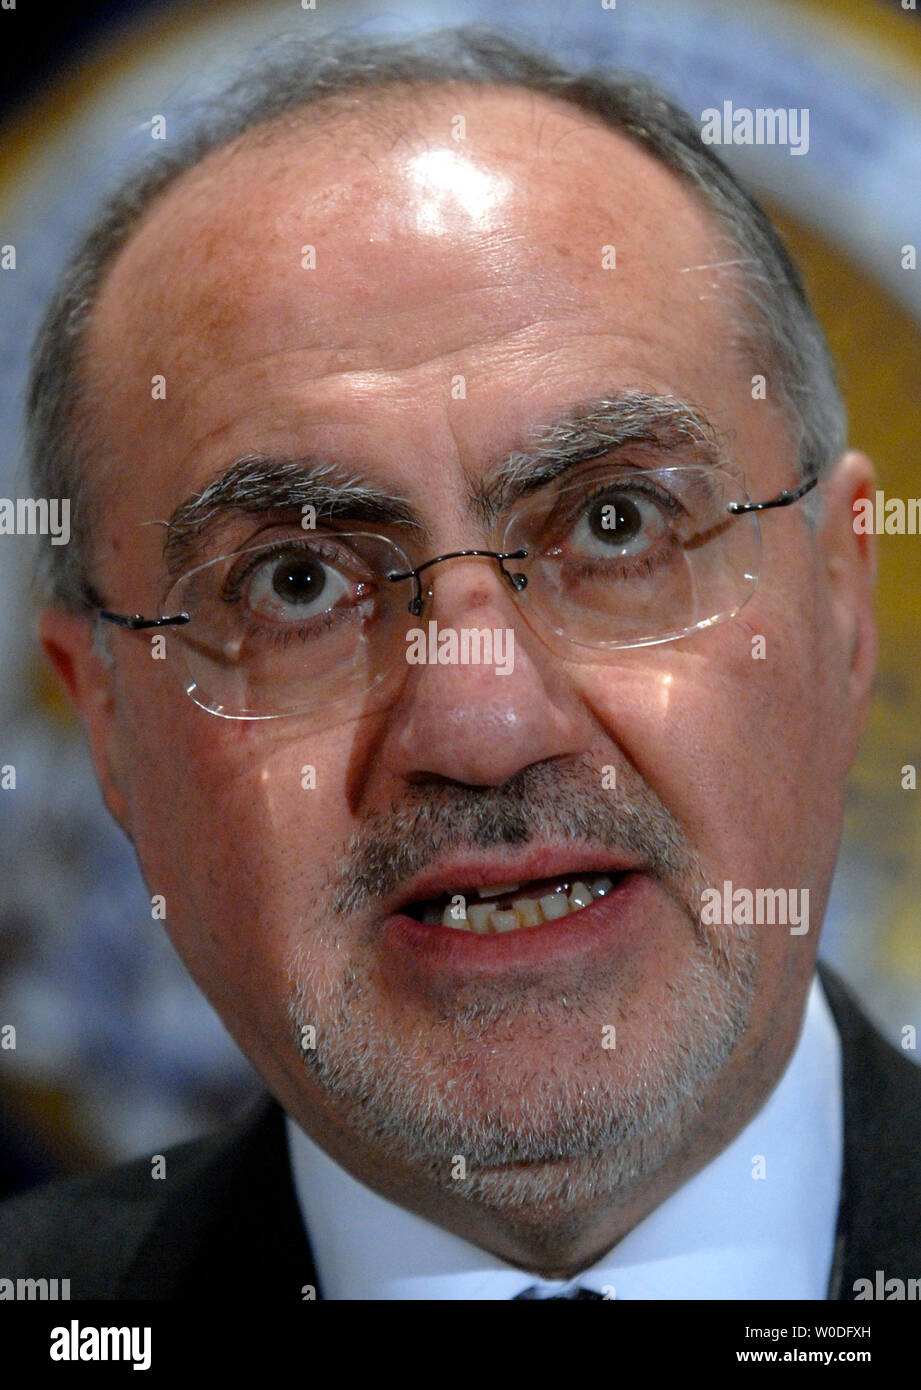 Ali Allawi, senior adviser to Iraqi Prime Minister Nuri Kamal al-Malaki, discusses the effects that the war is having on Iraq during a news conference in Washington on April 9, 2007. (UPI Photo/Kevin Dietsch) Stock Photo